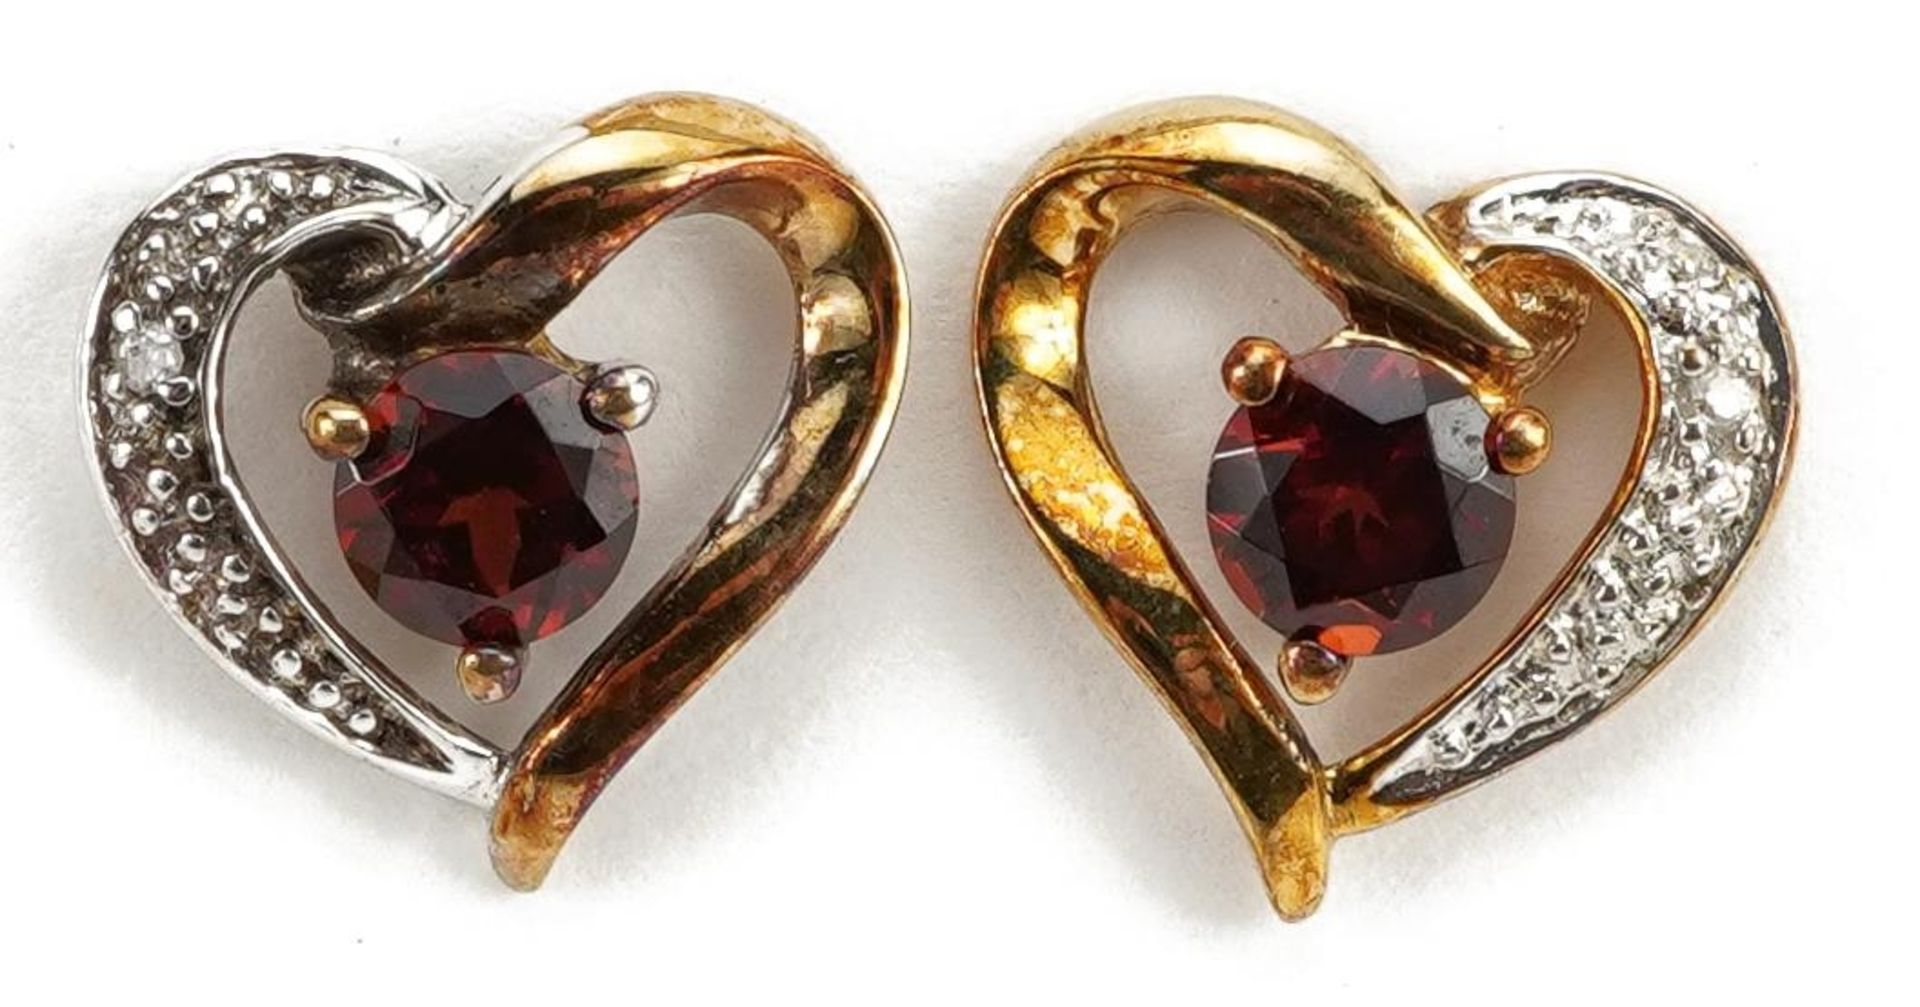 Pair of 9ct gold garnet and diamond love heart stud earrings, 1.0cm high, 1.2g : For further